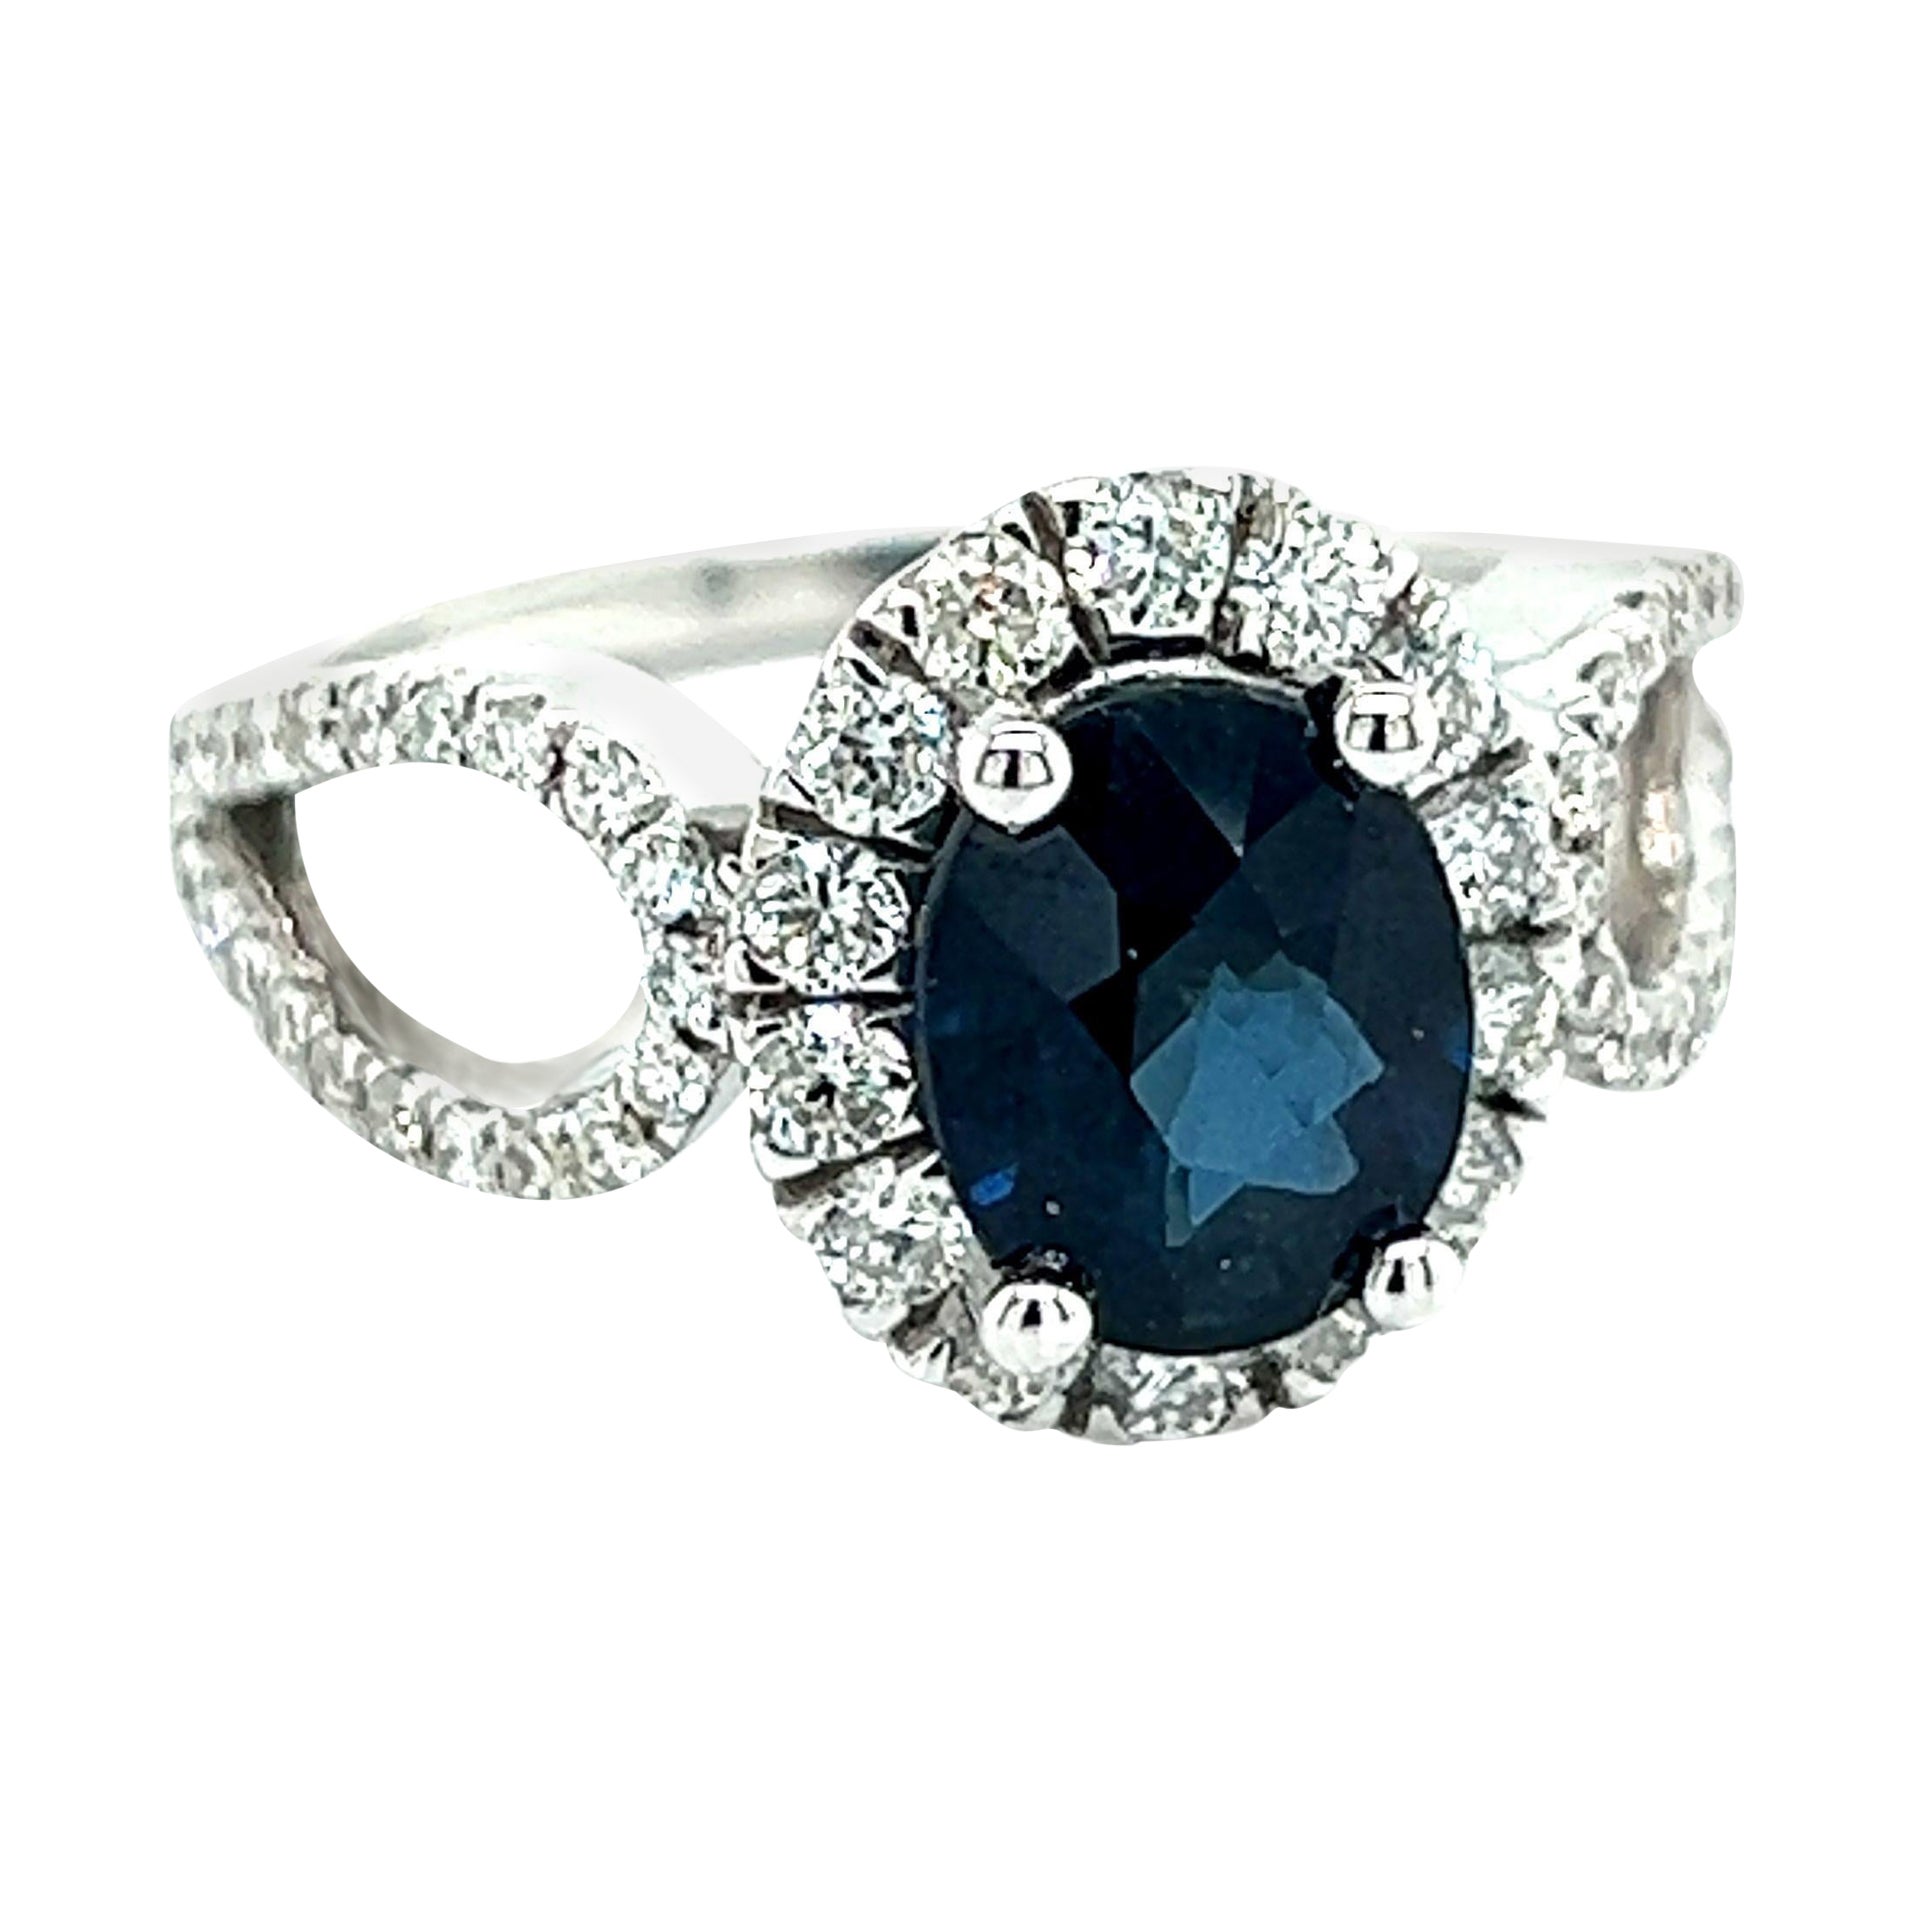 Natural Sapphire Diamond Ring Size 6.25 14k W Gold 2.93 TCW Certified For Sale